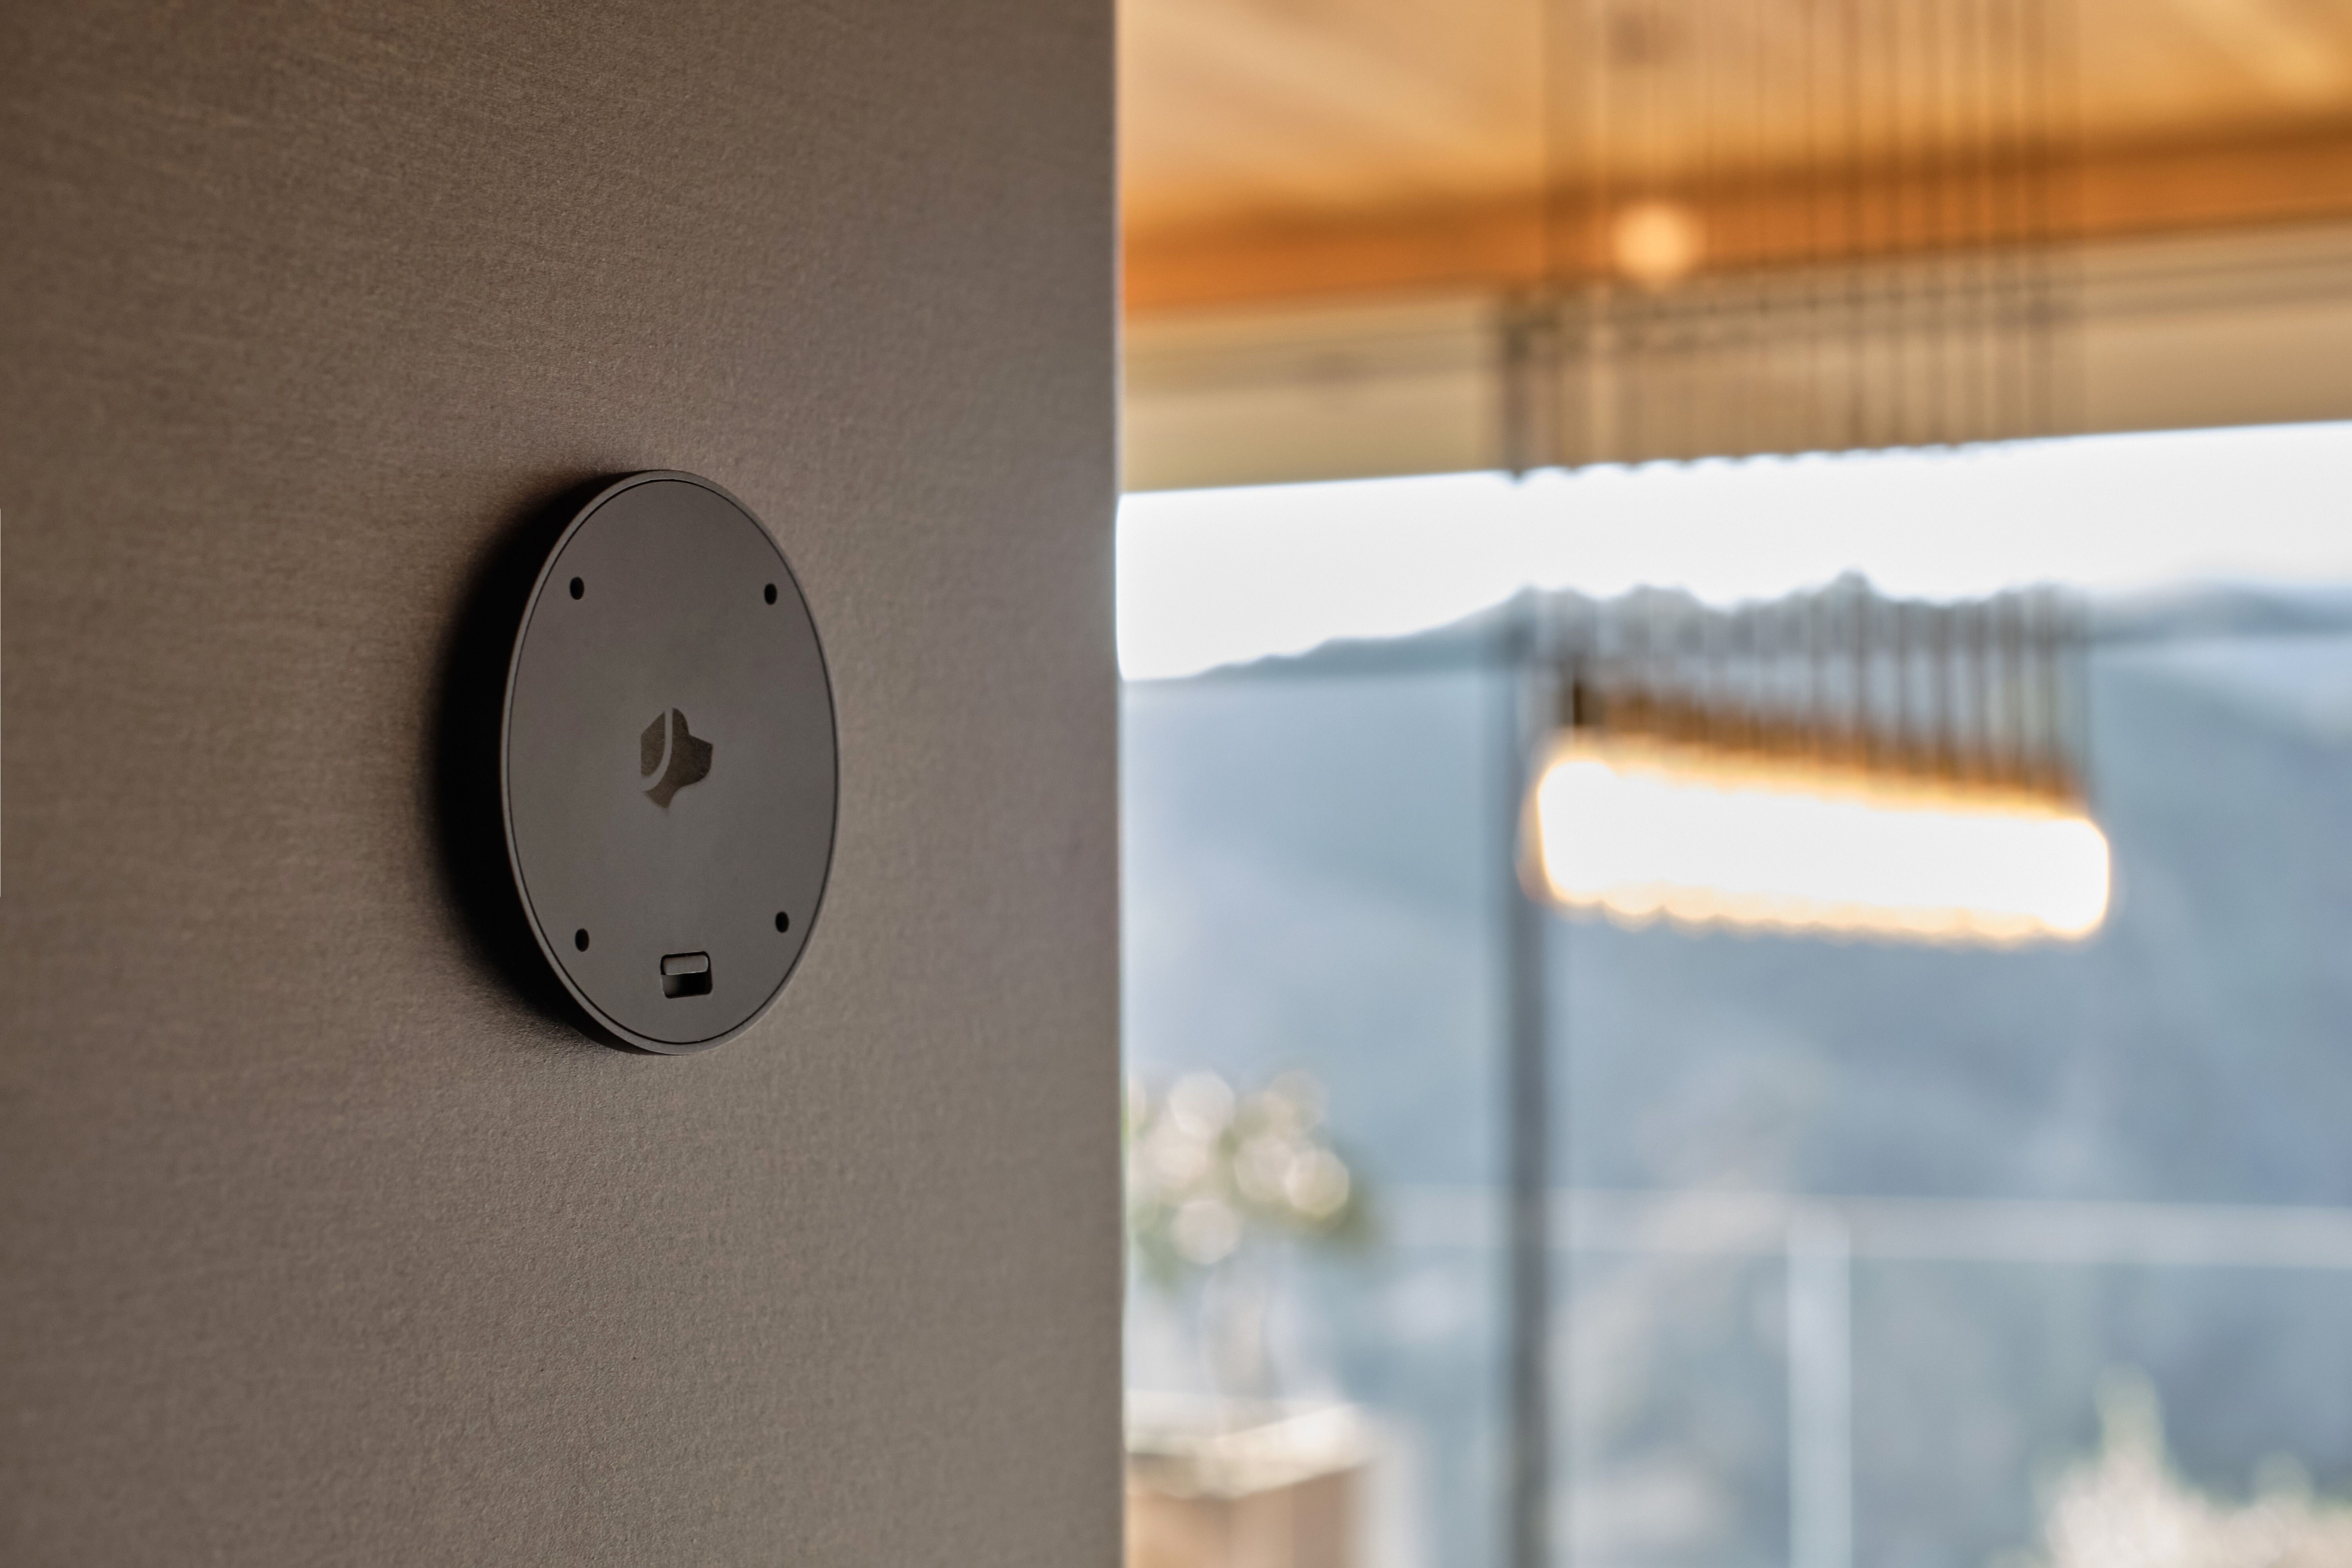 Smart Home Security Device Wall Mounted in Upscale Living Space